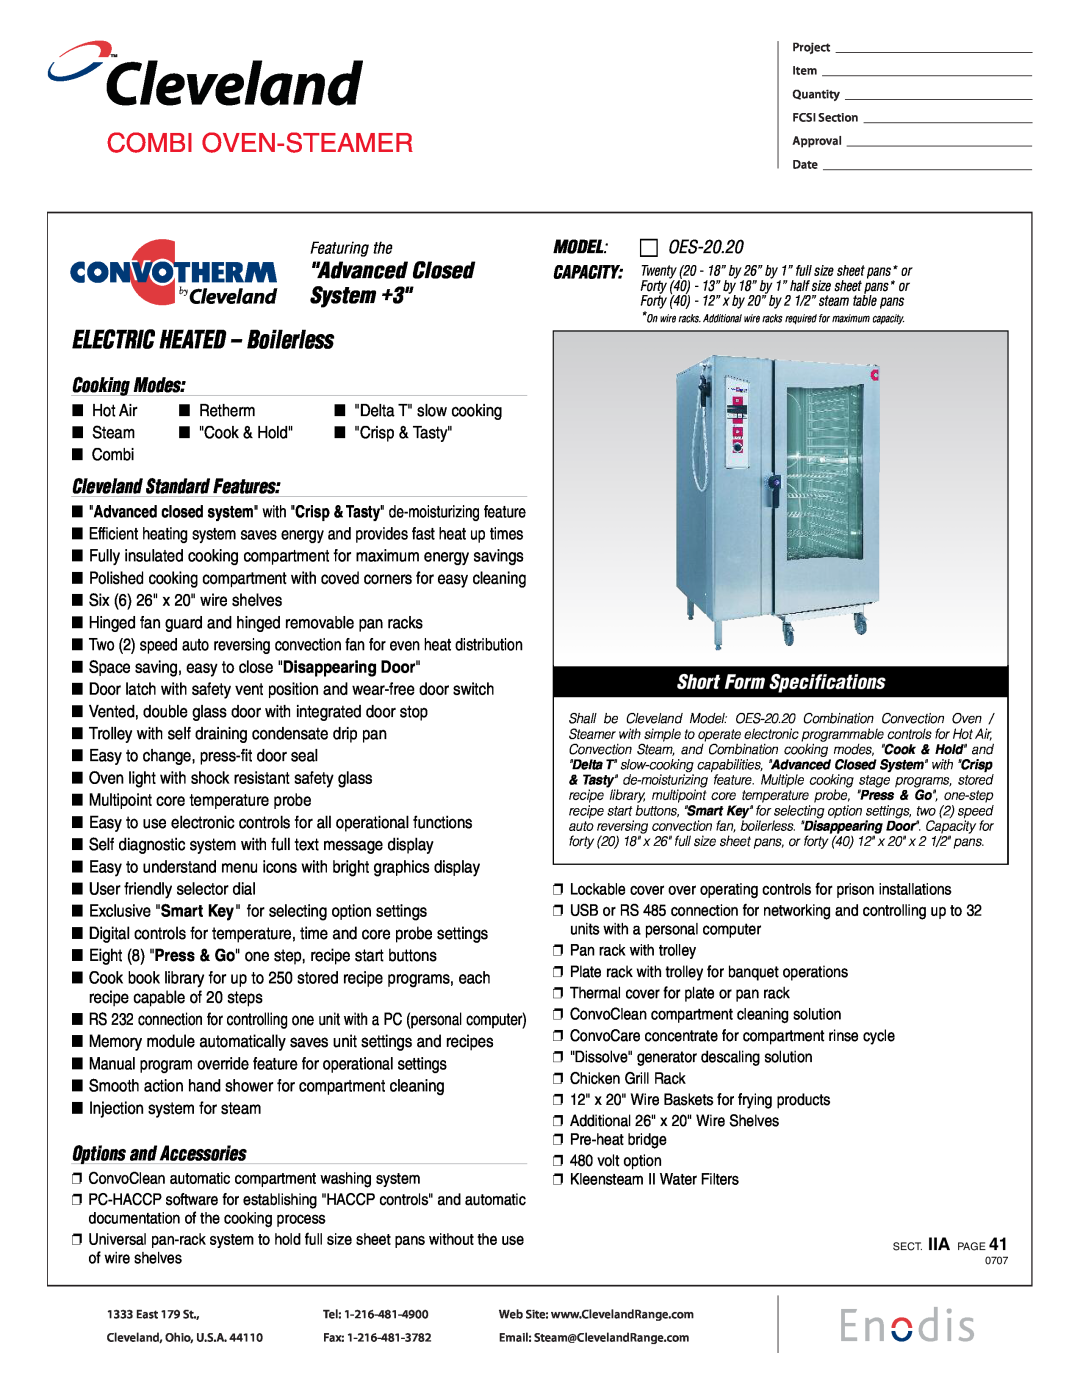 Cleveland Range OES-20.20 manual Service & Parts Manual, Convotherm Combination Oven-Steamer, MODELS Electric, Enodis 